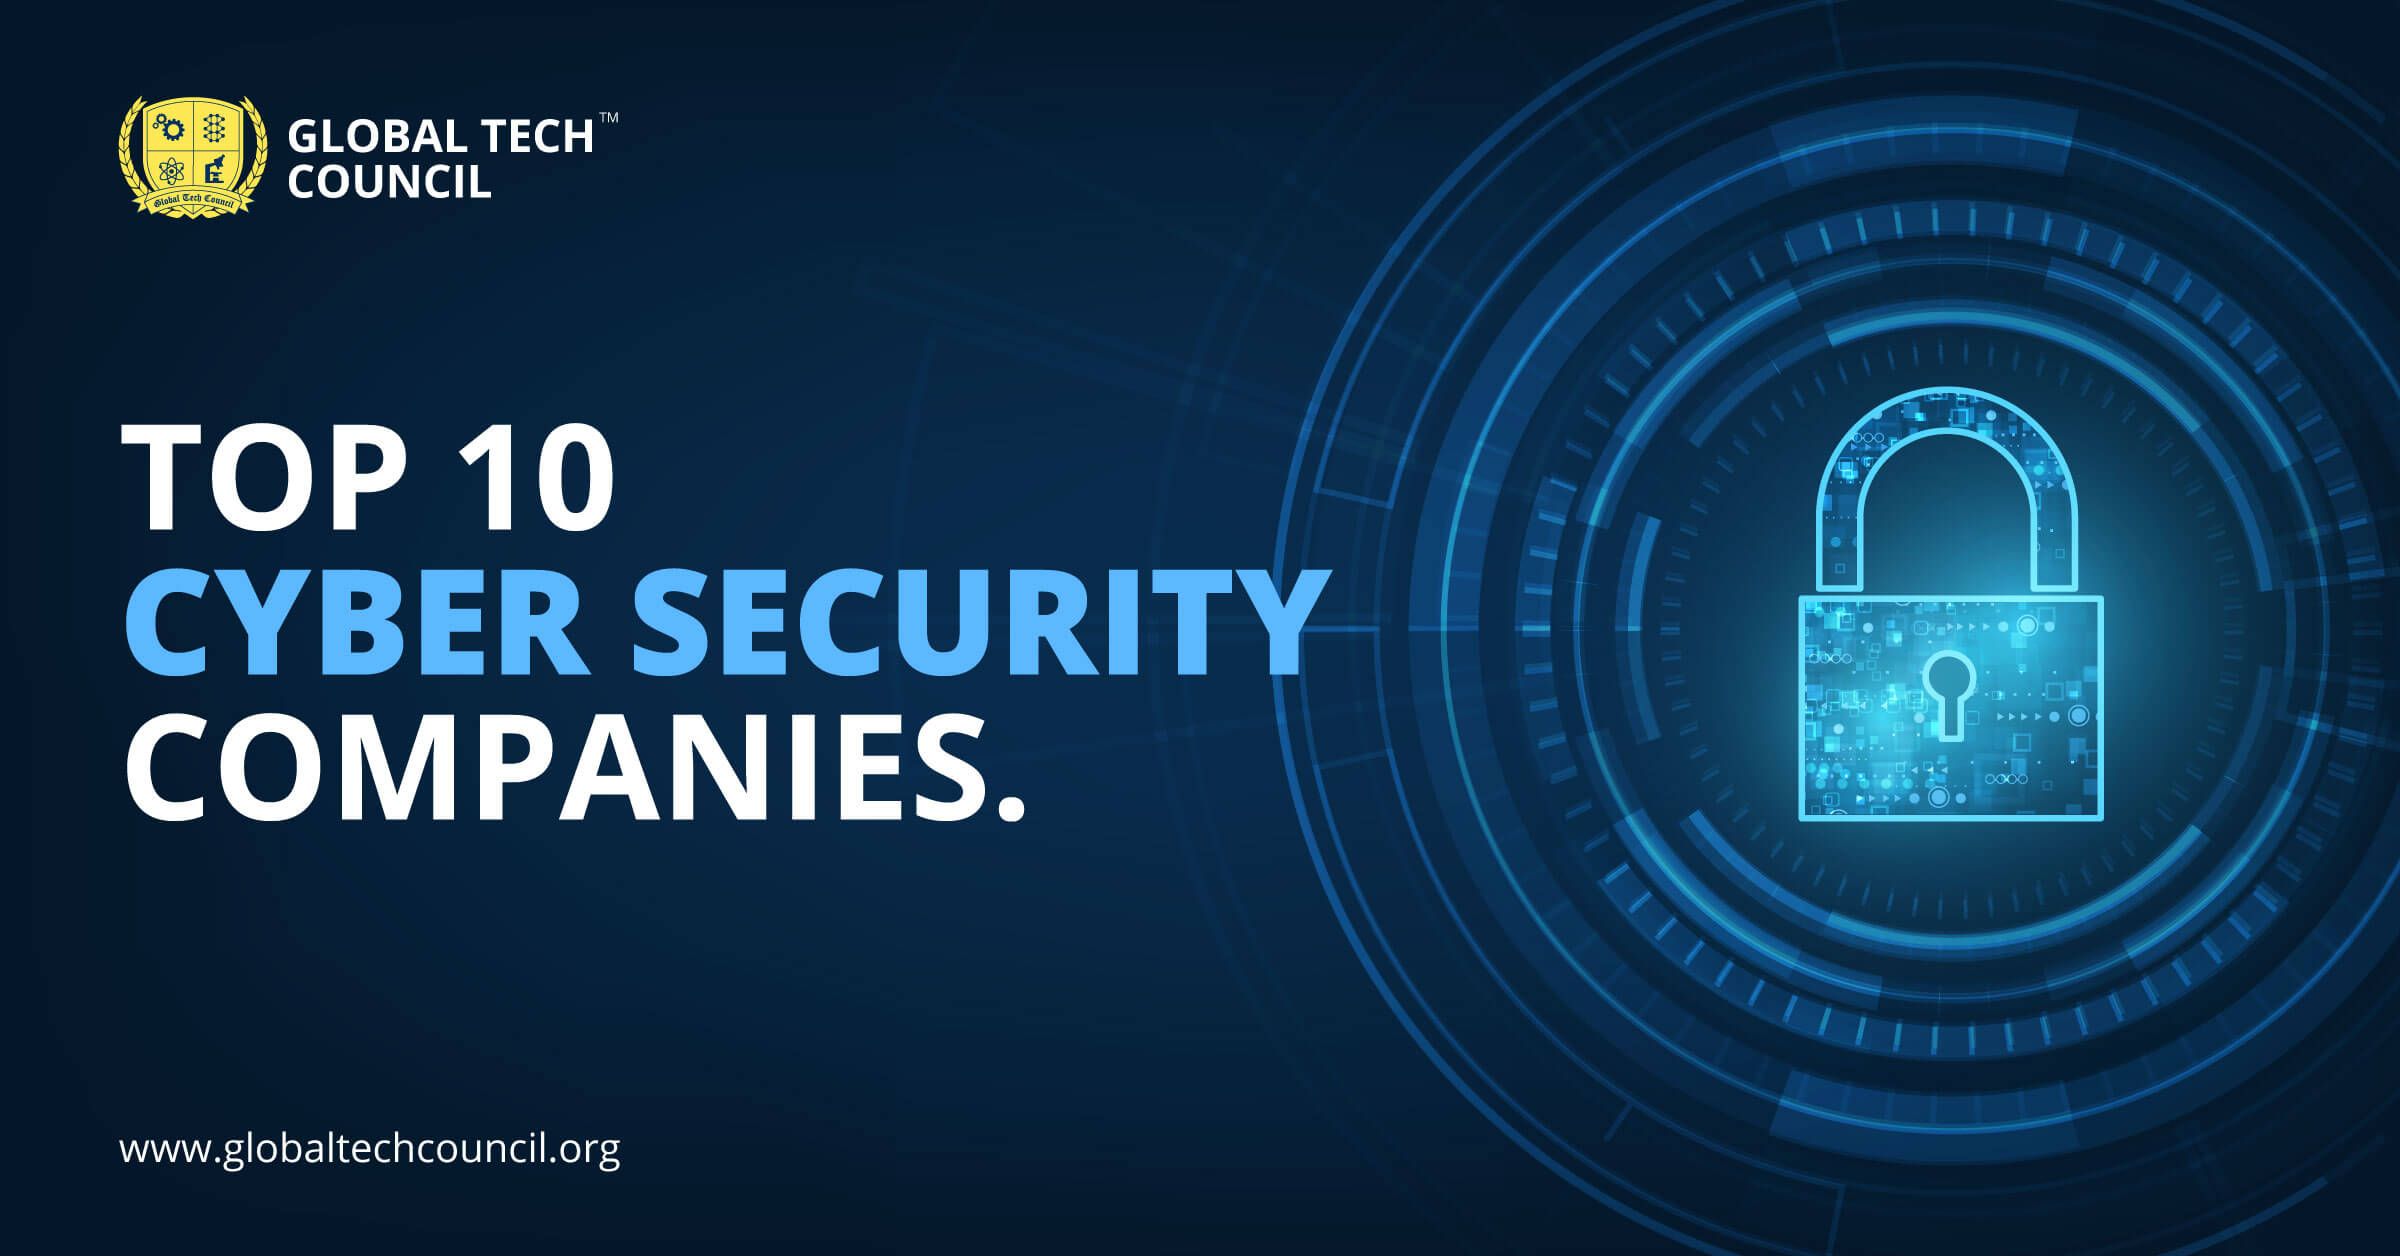 Top 10 Cyber Security Companies